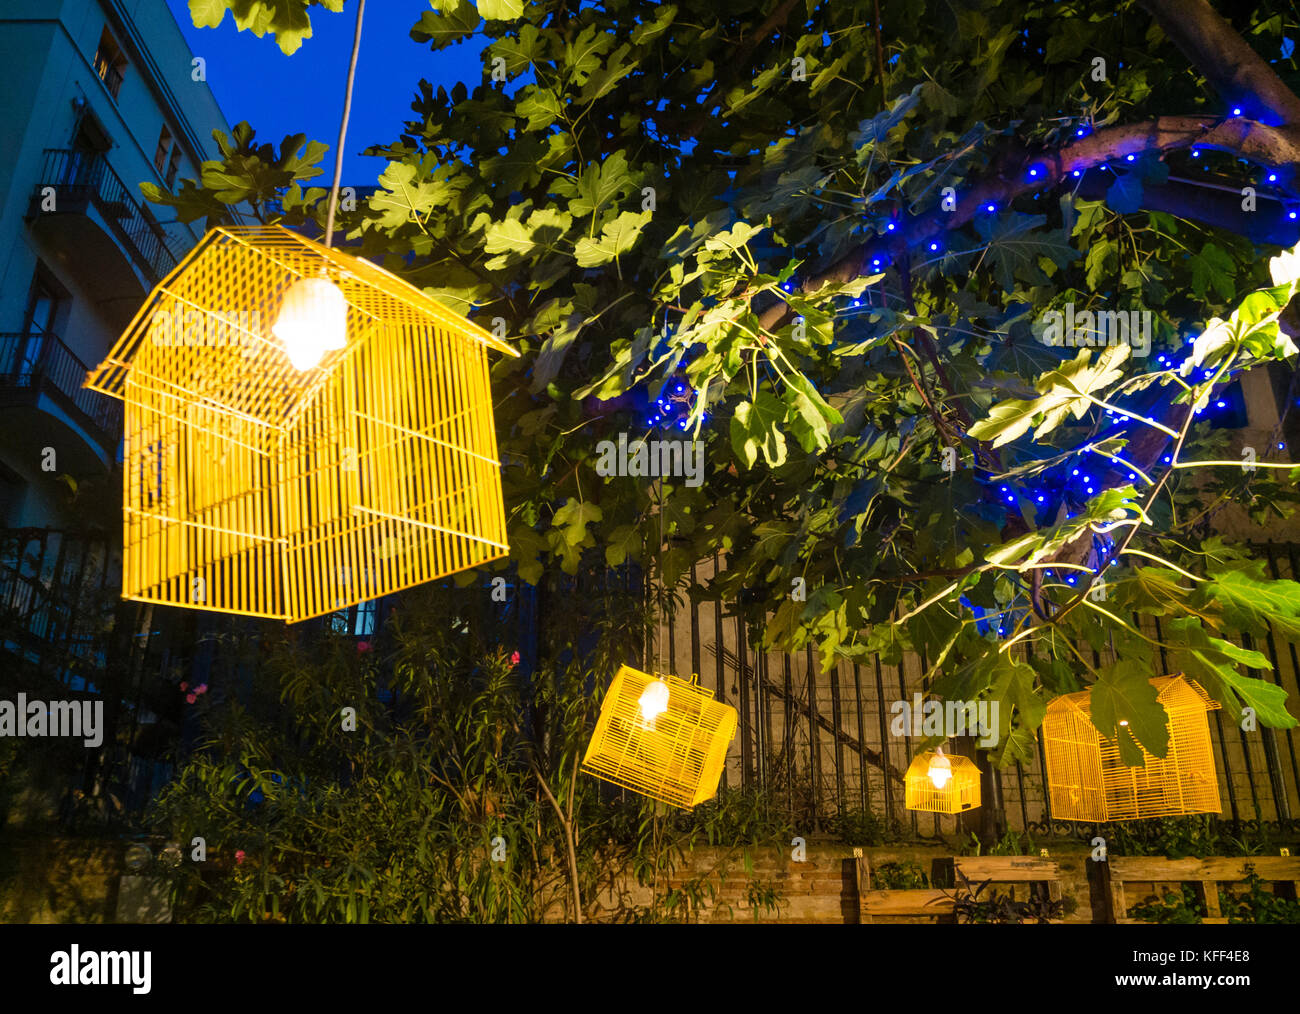 Barcelona, Spain - 11 Nov 2016: Illuiminated bird cages as decoration at an outdoor restaurant in Barcelona. Stock Photo